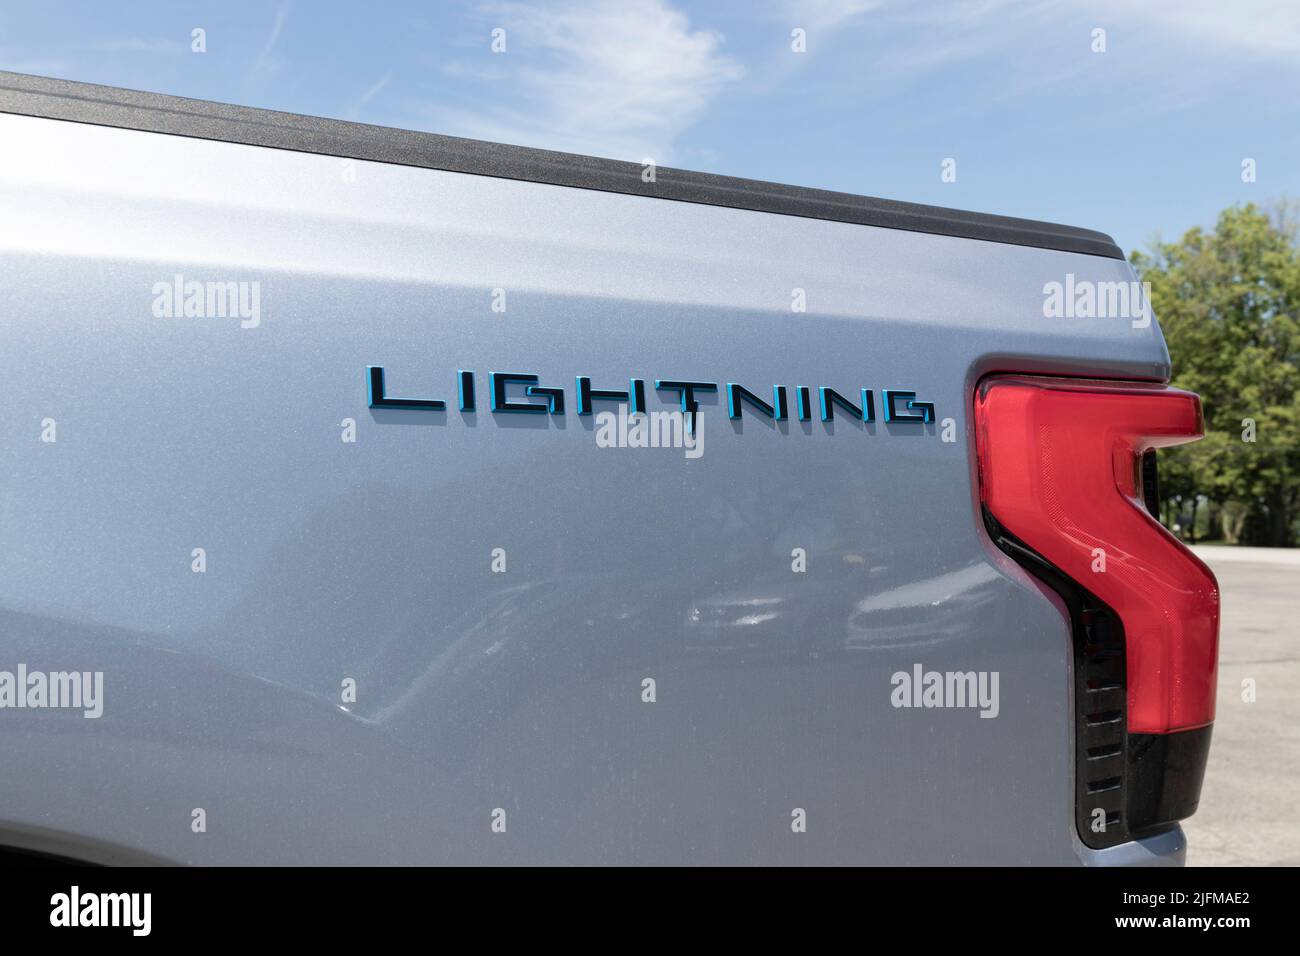 Tipton - Circa July 2022: Ford F-150 Lightning display. Ford offers the F150 Lightning all-electric truck in Pro, XLT, Lariat, and Platinum models. Stock Photo